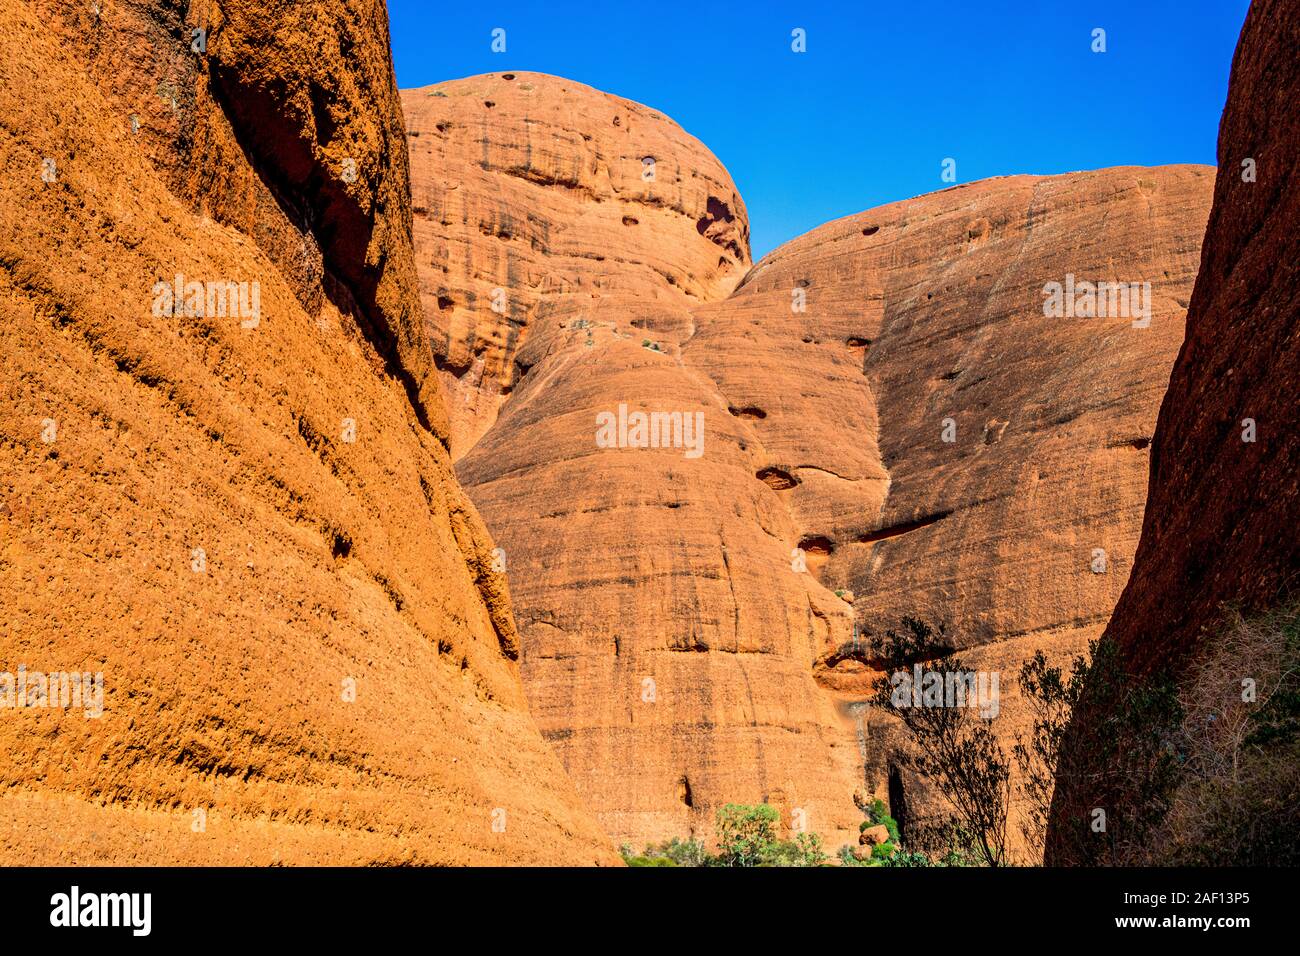 The iconic dome like structures along the Valley of the Winds walk in the Olgas. Kata Tjuta, Northern Territory, Australia Stock Photo